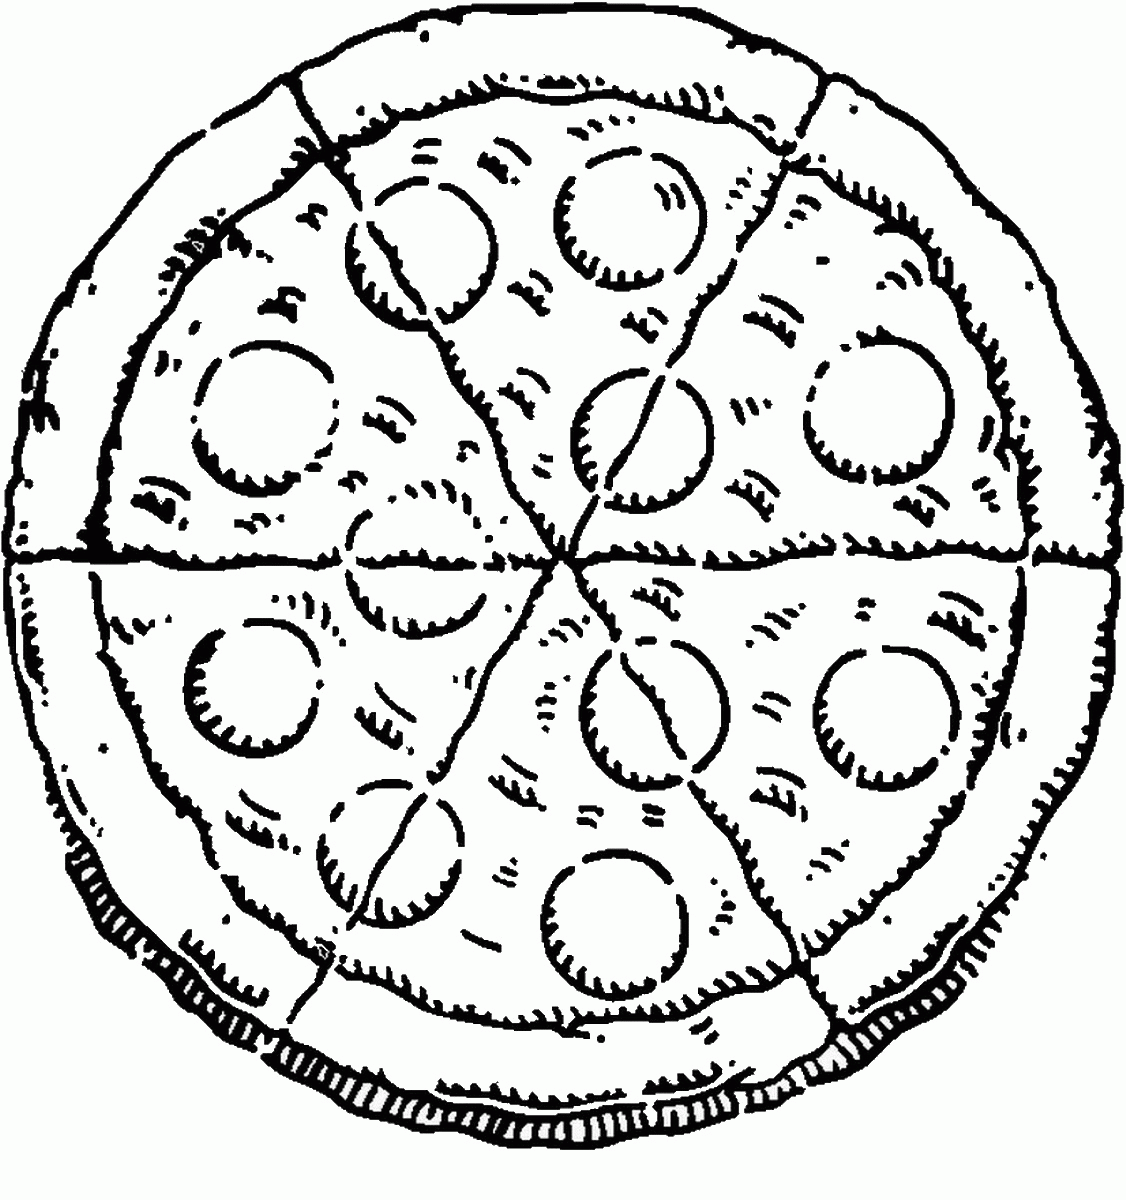 Pizza Coloring Pages